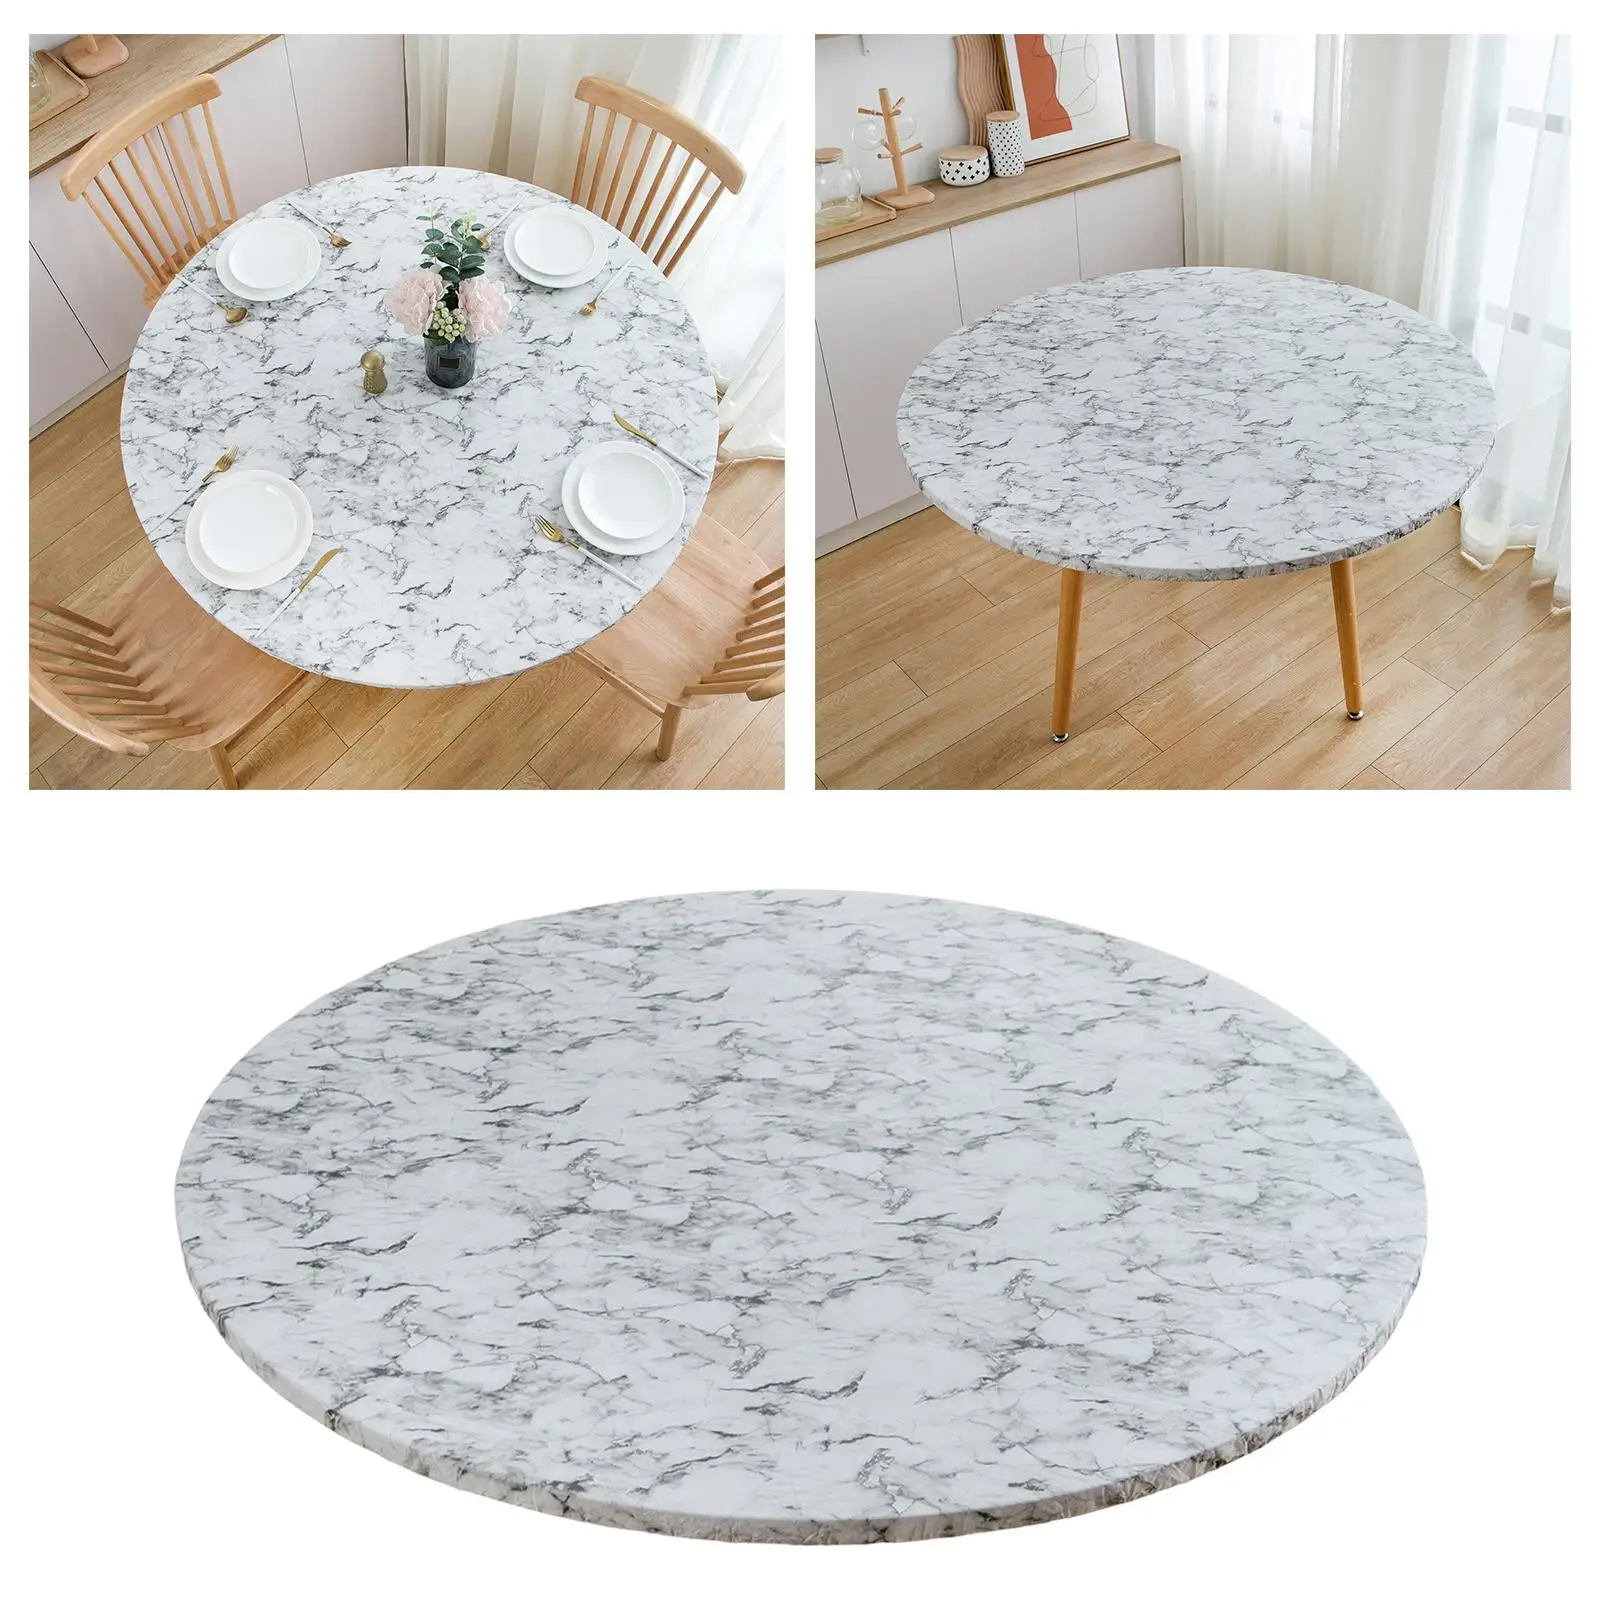 Round Vinyl Fitted Tablecloth Table Cloth Stain Resistant with Flannel Backing Waterproof Oil Proof Elastic Edge Table Cover